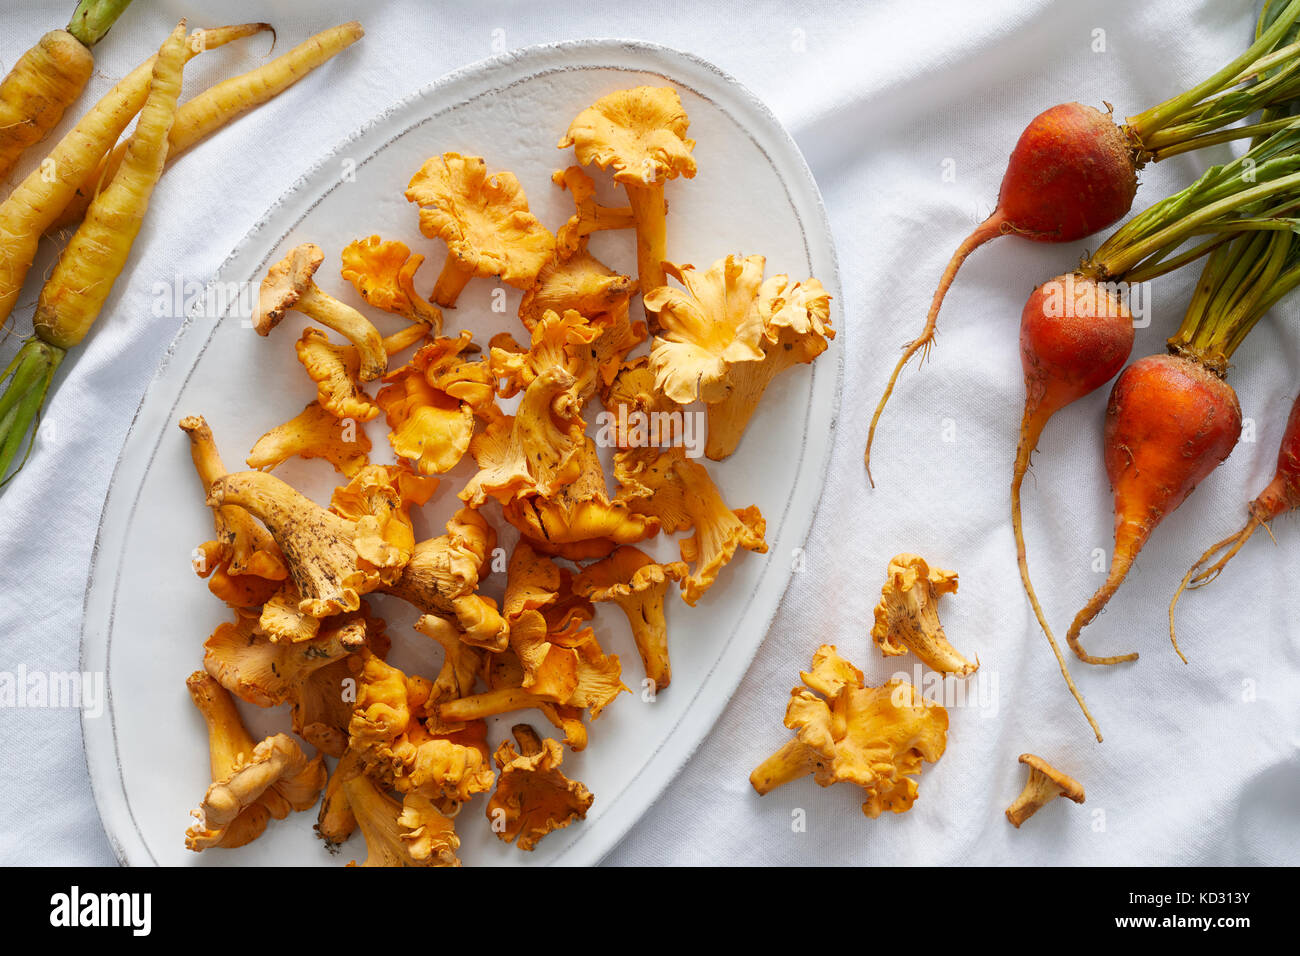 Wild chanterelle mushrooms, golden yellow beets and yellow carrots Stock Photo